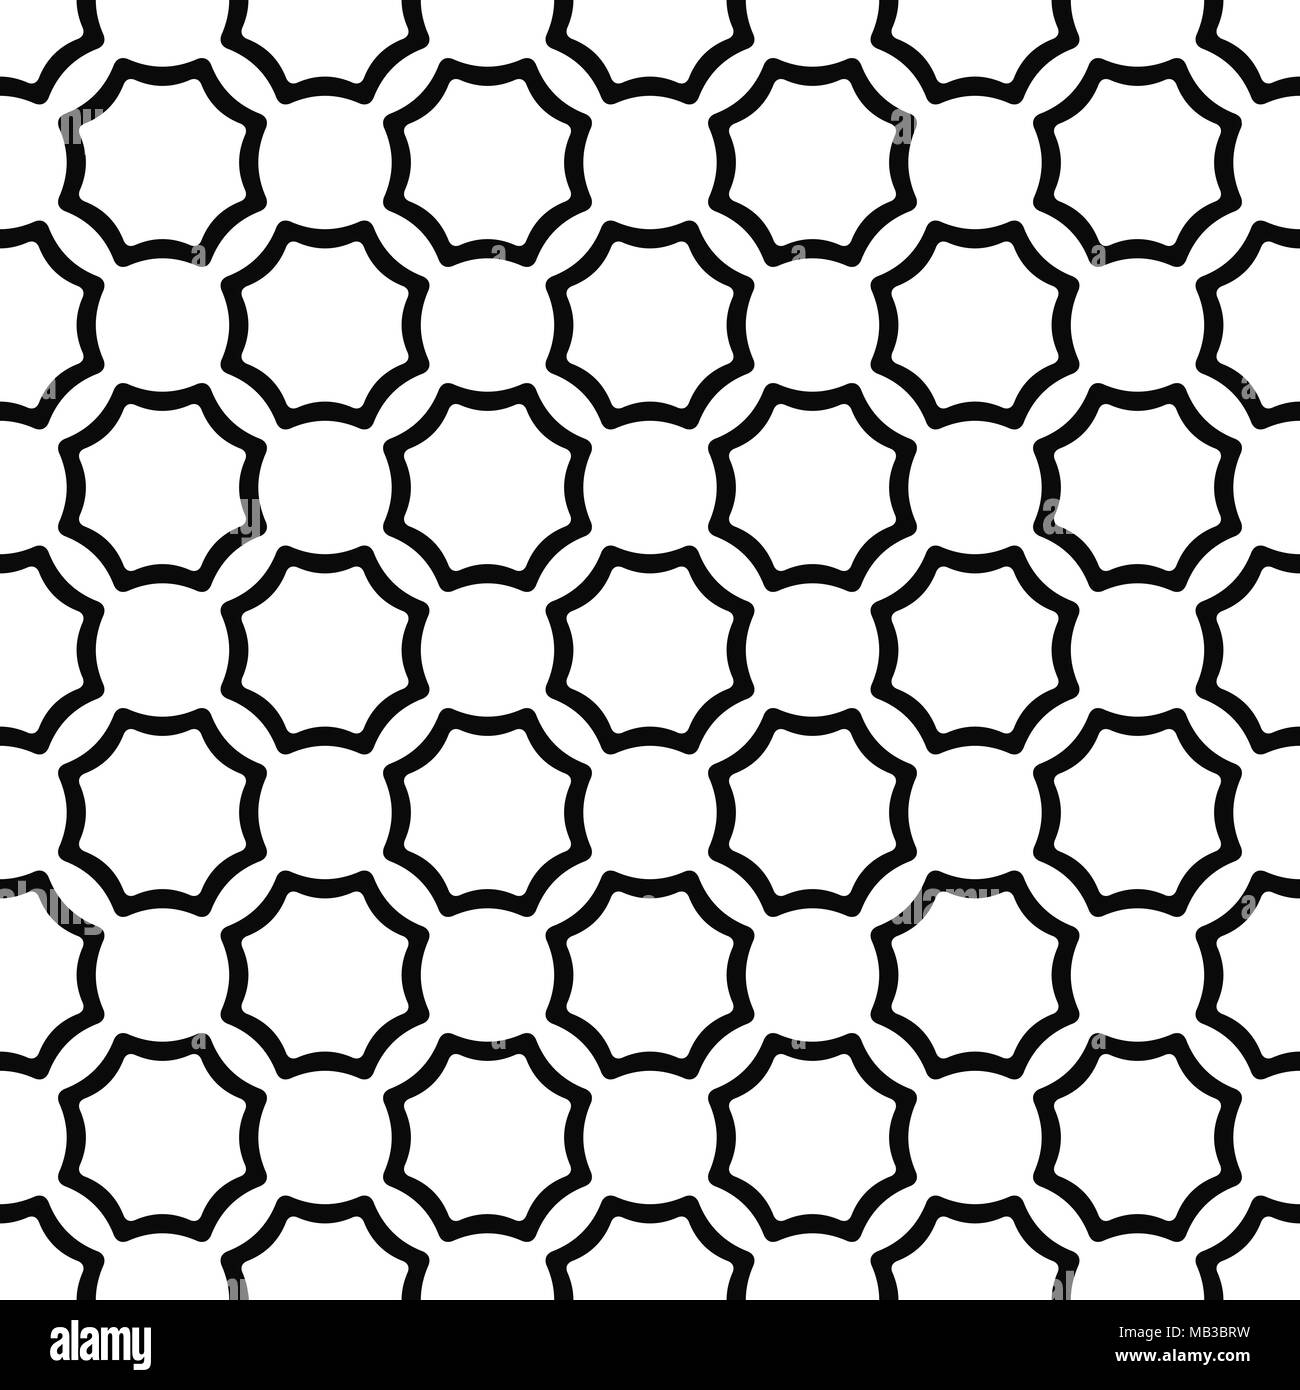 Black and white seamless curved octagon pattern Stock Vector